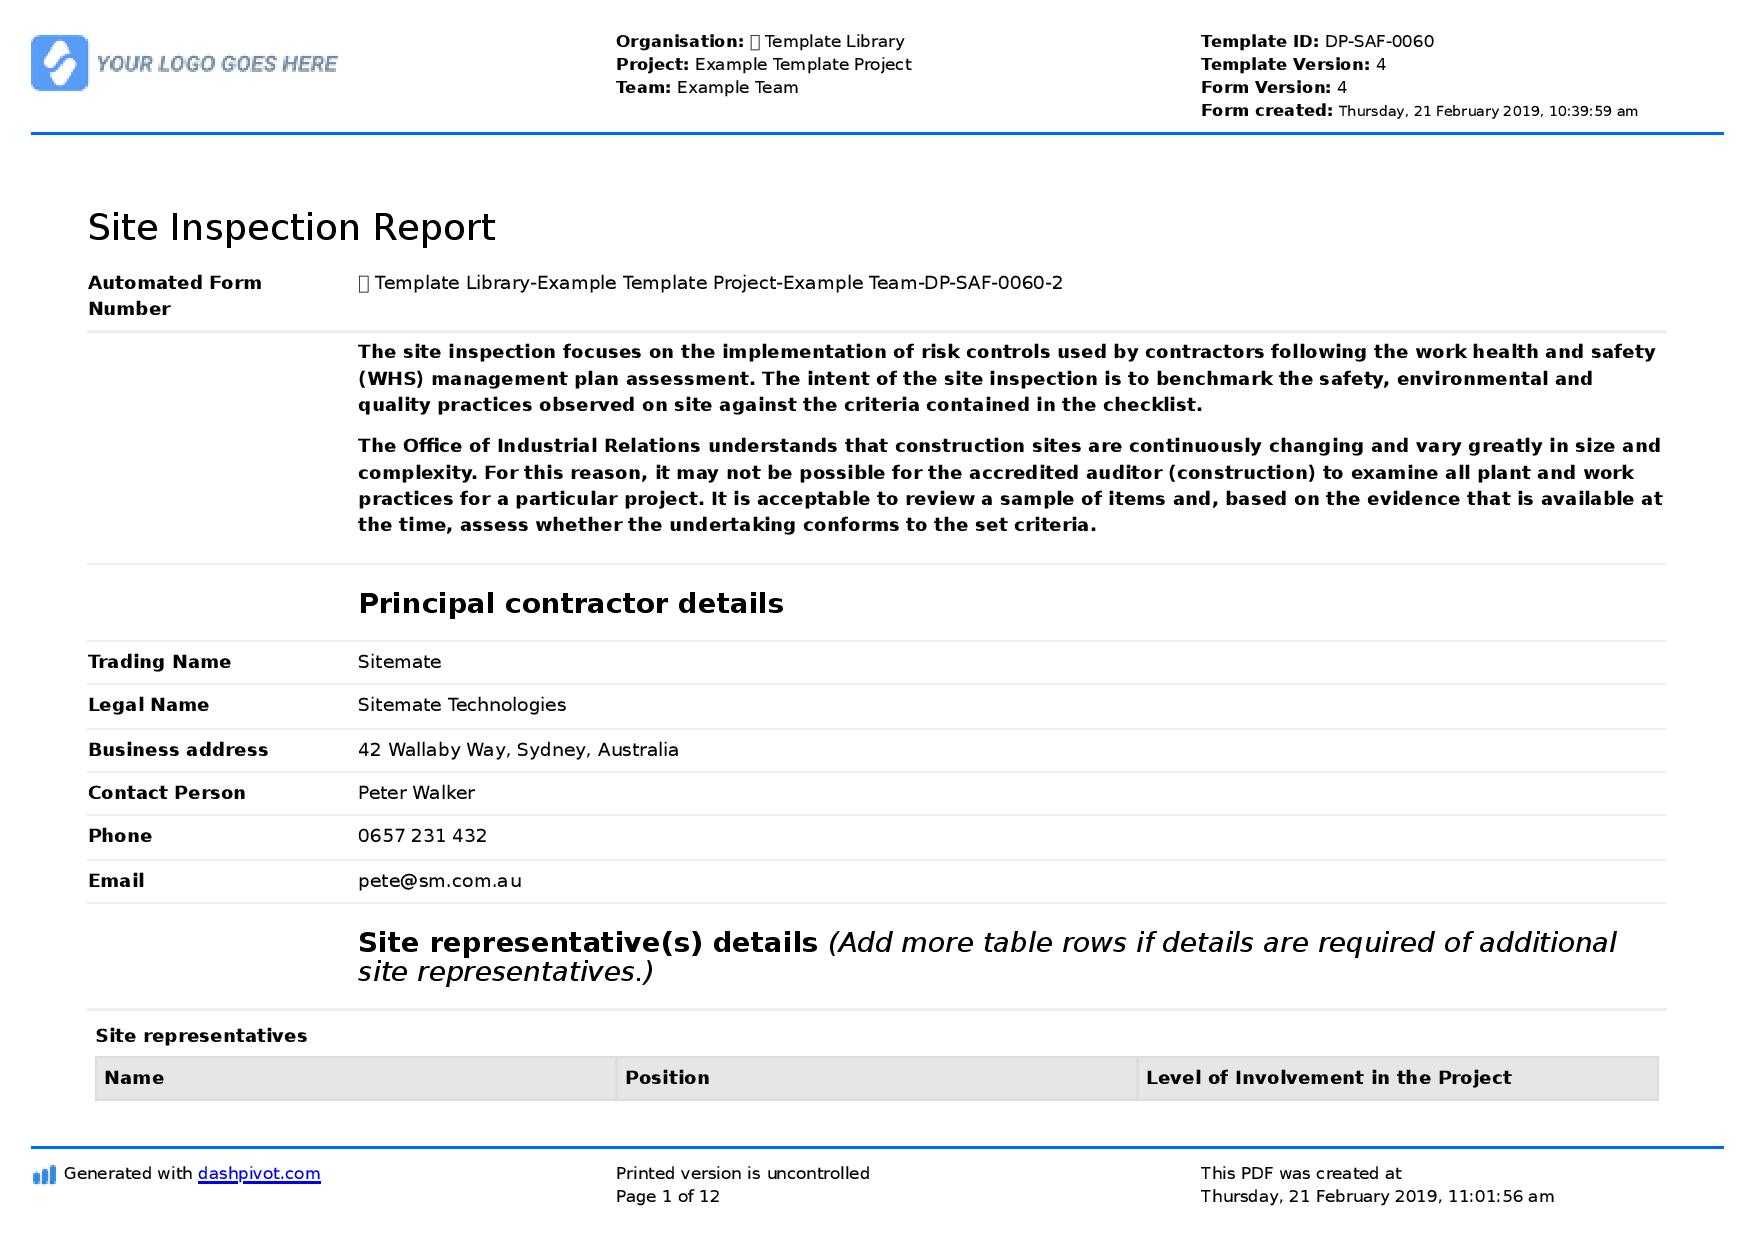 Site Inspection Report: Free Template, Sample And A Proven Pertaining To Part Inspection Report Template